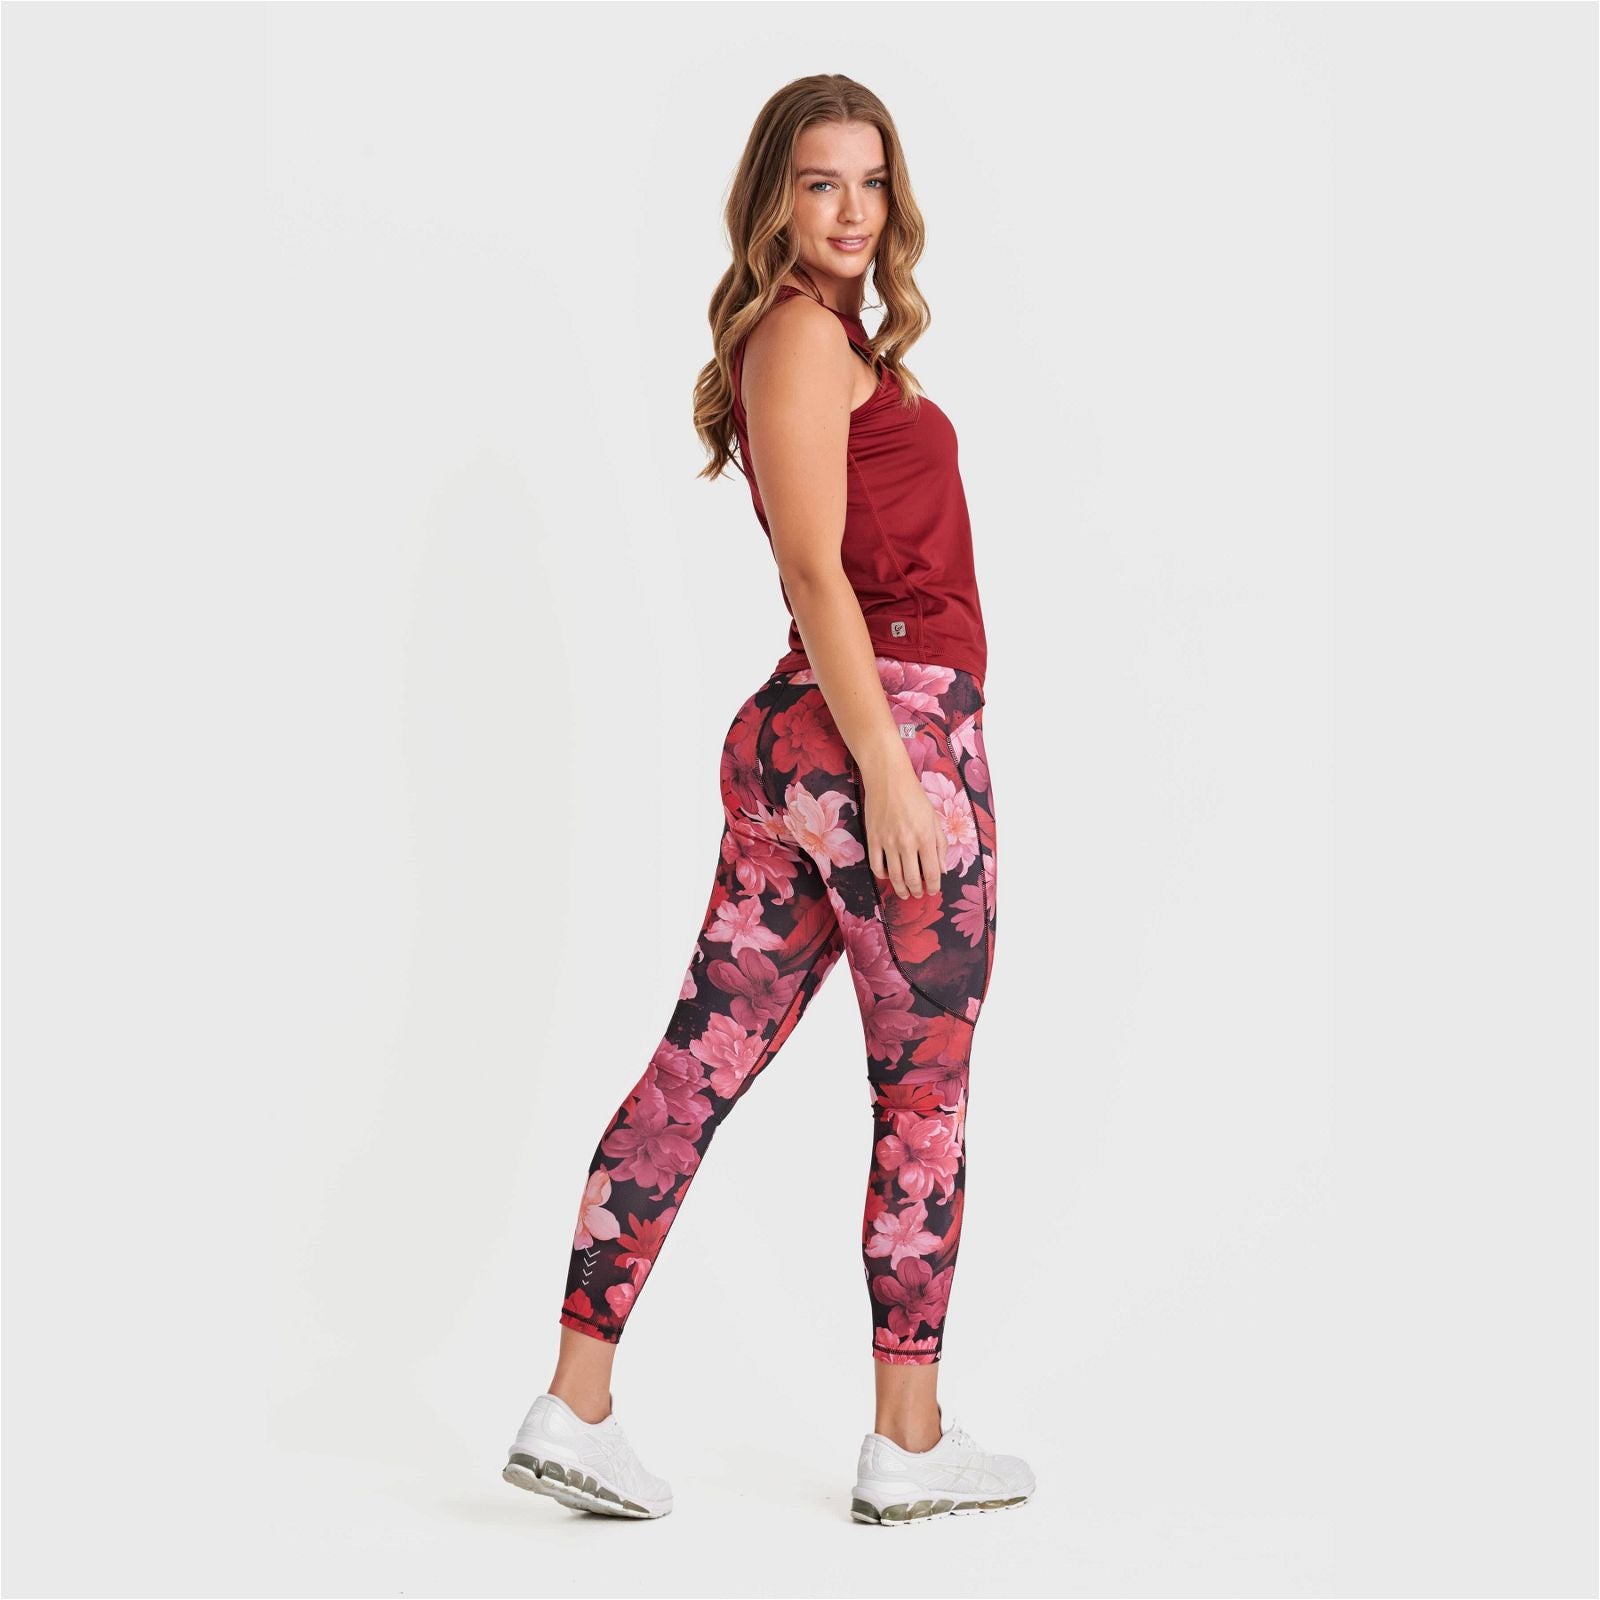 Superfit All Over Flower Print - Super High Waisted - Petite Length - Bordeaux 1